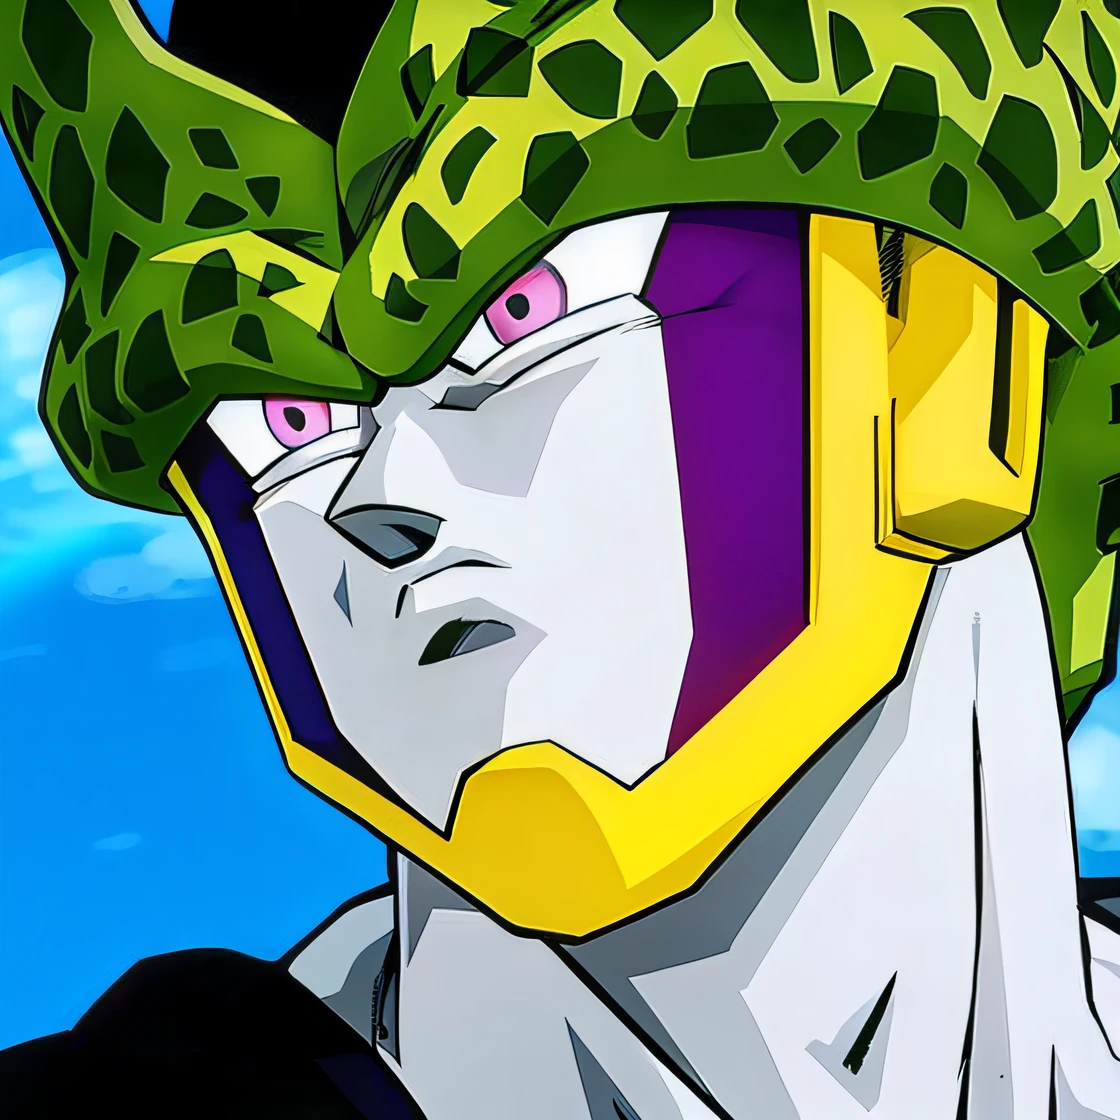 Dragon Ball Gohan with a green hat and glasses, Cell, cell shaded!!!, cell animation, cell-shading, cell - shading, cell-shaded, cell - shaded, cell shaded, cell-shading, Broly, cell-shading. ( RB 6 s, cell shaded adult animation, cell shaded art, cells, Personagem Dragonball, cel animation, Obra-prima do anime --auto